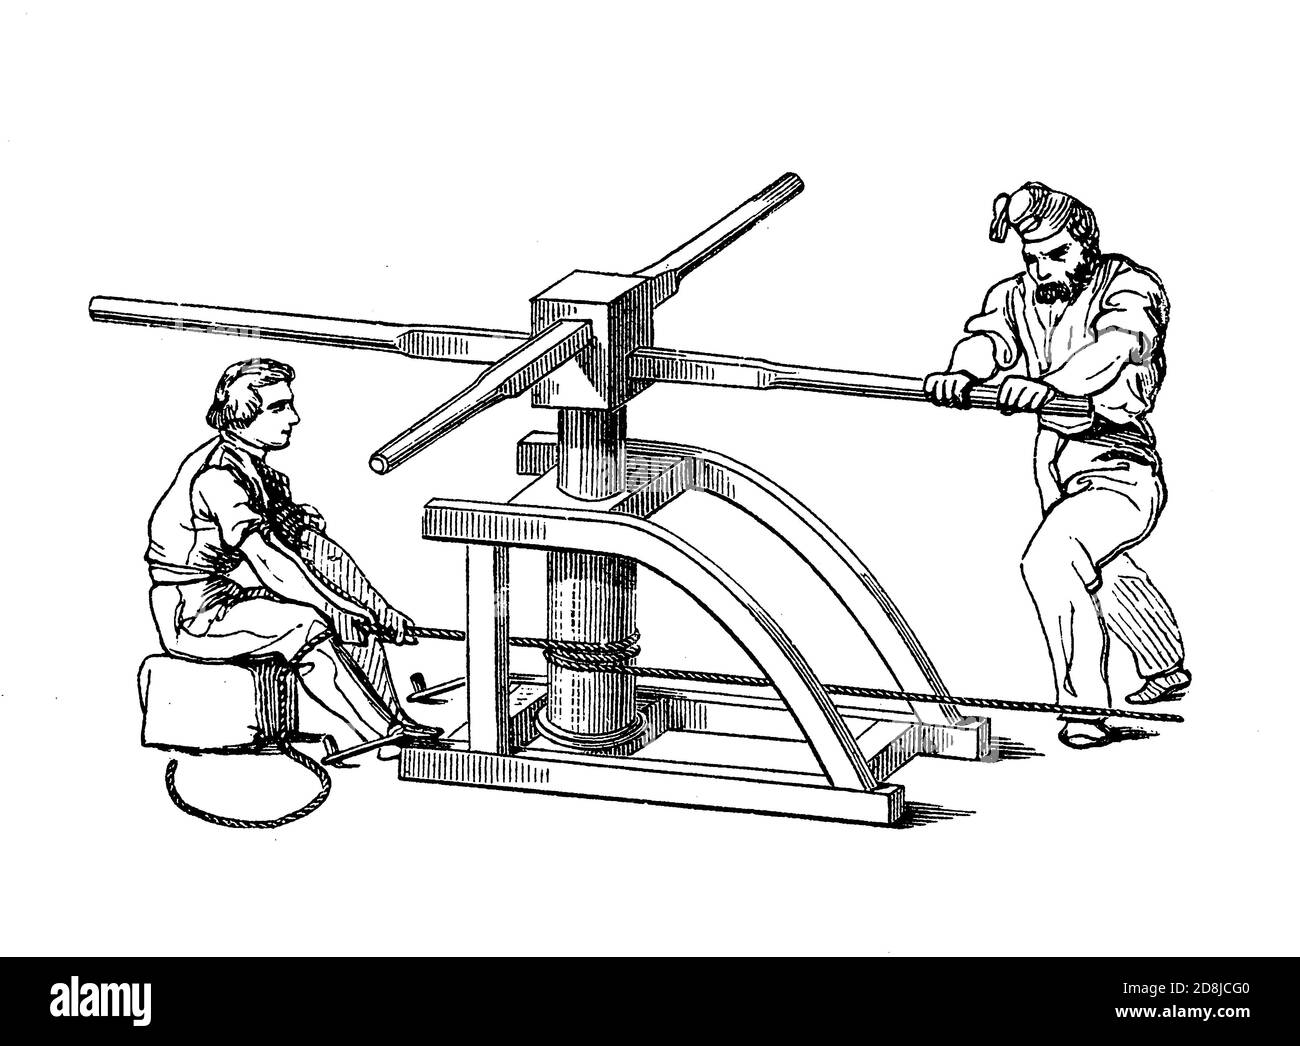 Vintage illustration of two sailor managing a capstan, vertical-axled rotating machine developed for use on sailing ships to multiply the pulling force of the seamen when hauling ropes, cables, and anchors Stock Photo